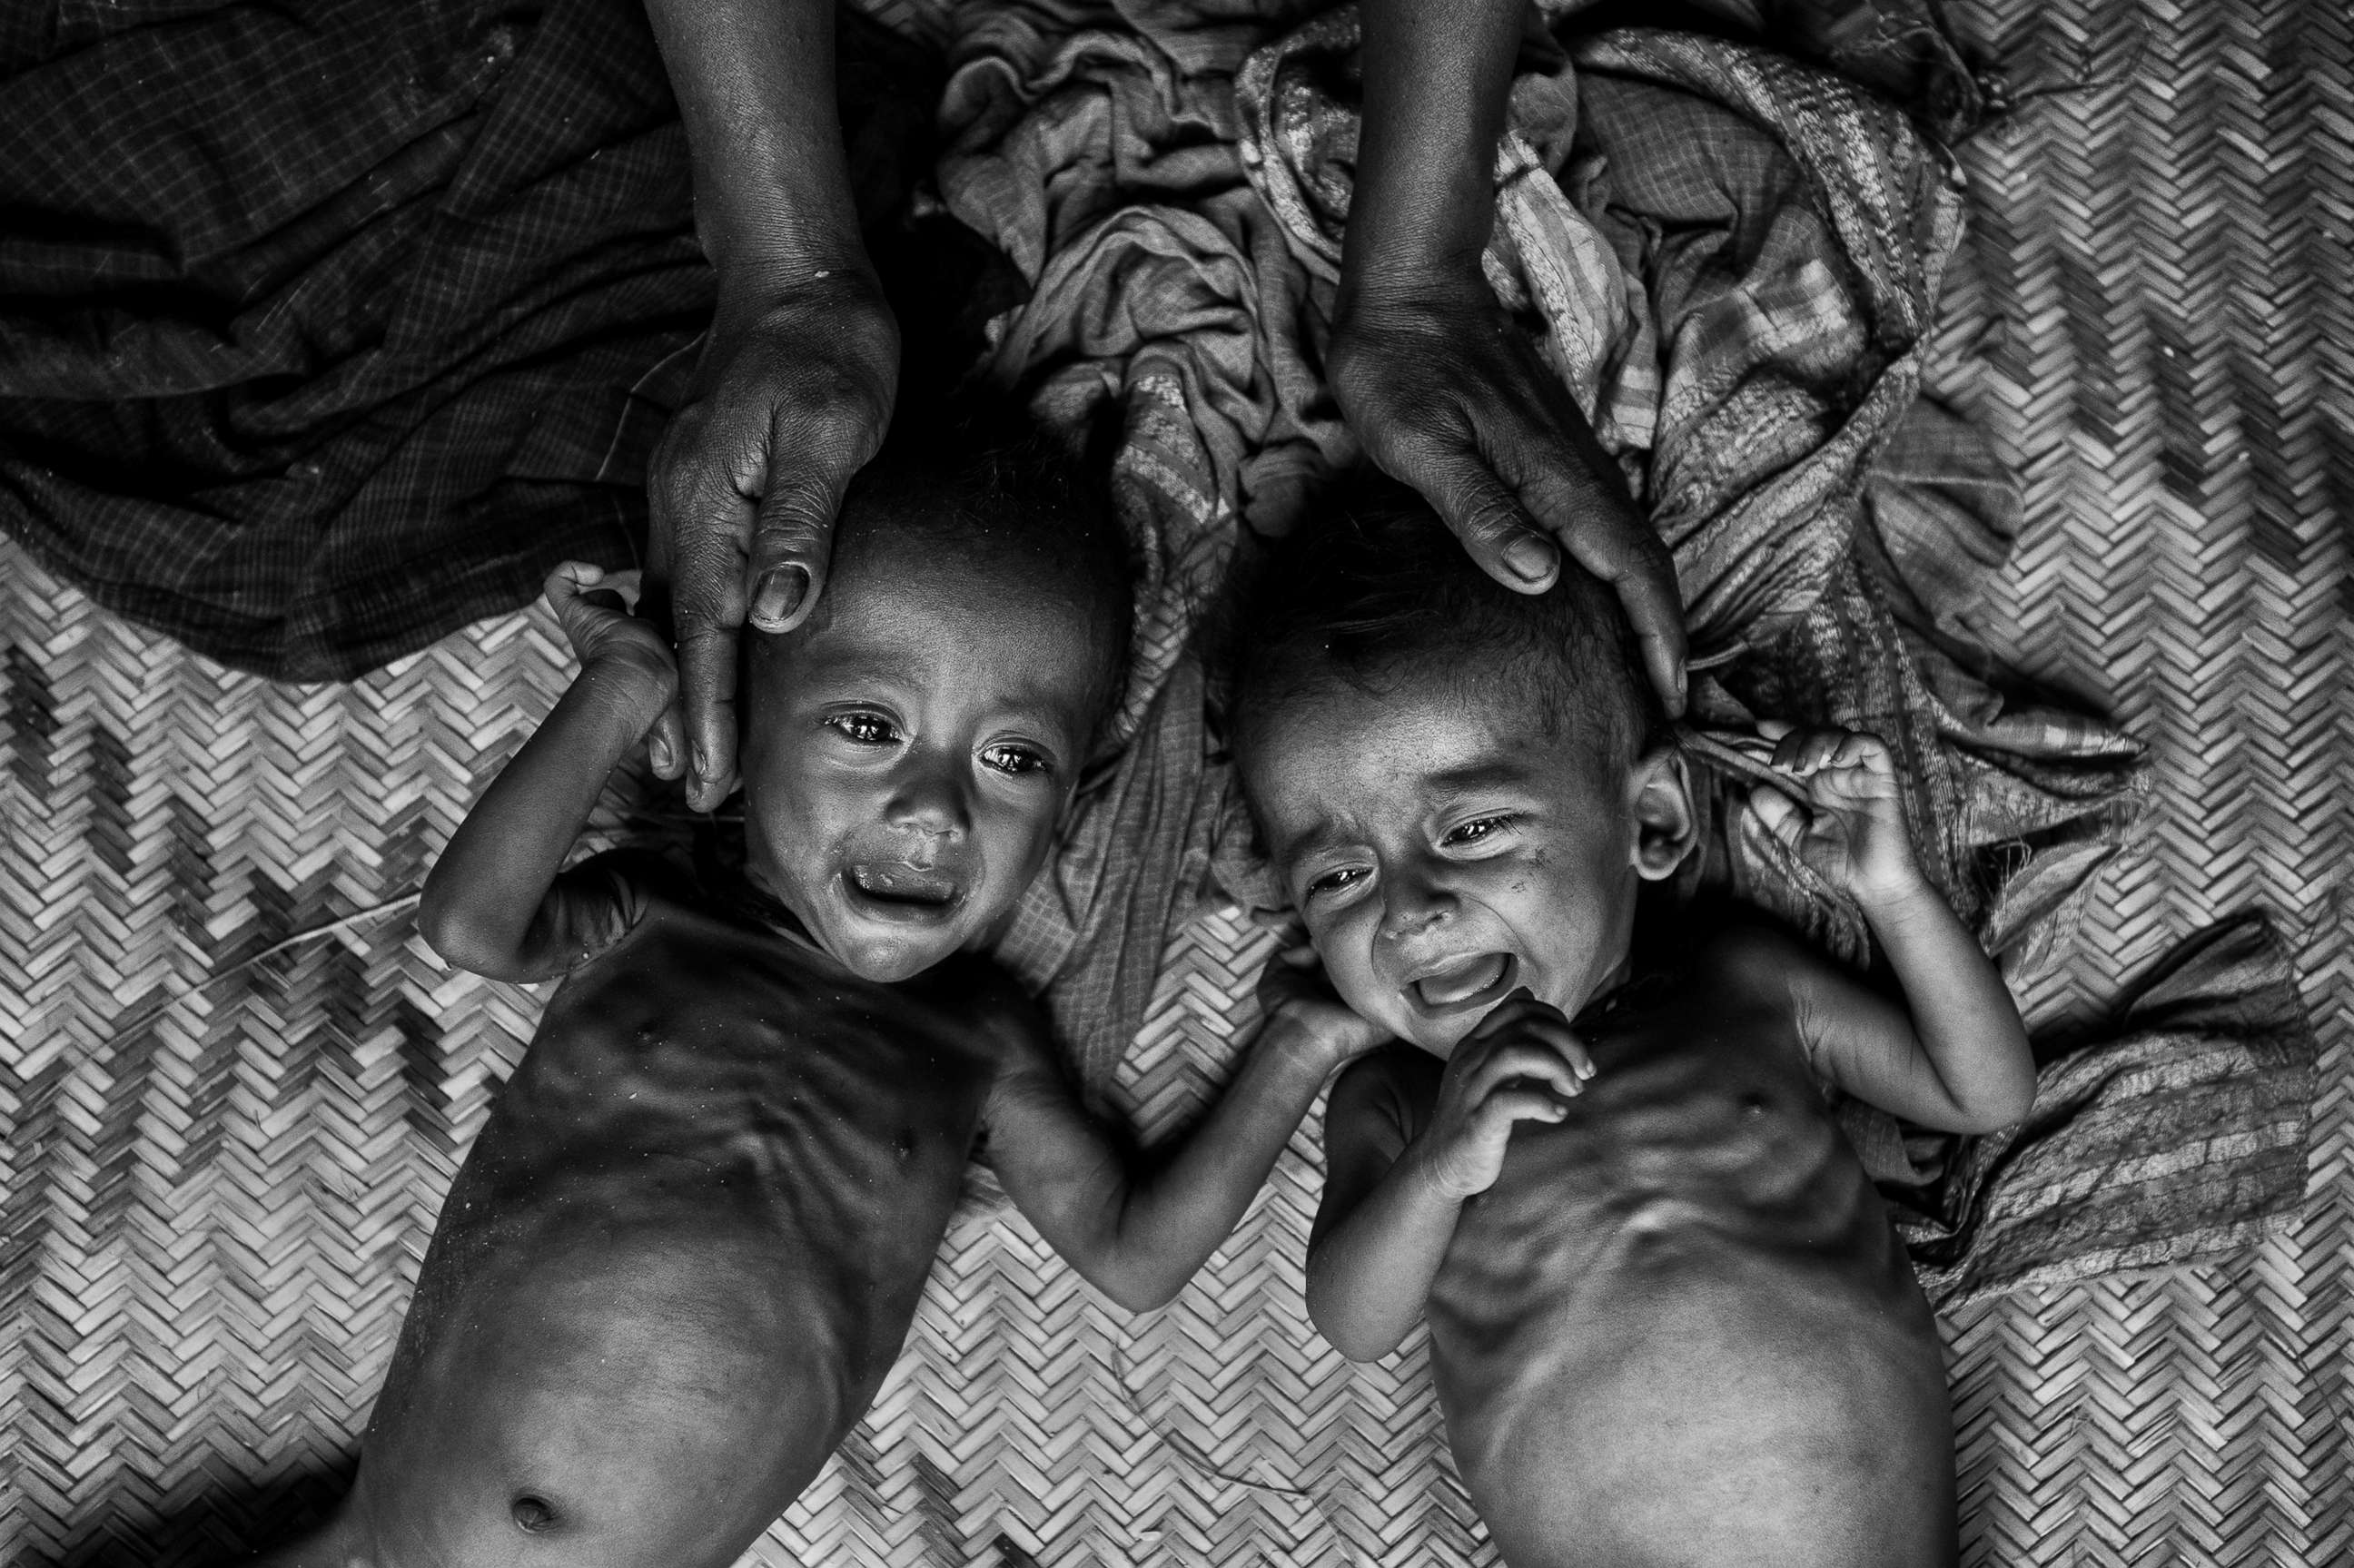 PHOTO: Malnourished and suffering from diarrhea, two Rohingya refugee children cry on the floor of a makeshift shelter at the Balukali refugee camp in Bangladesh, Sept. 27, 2017. 